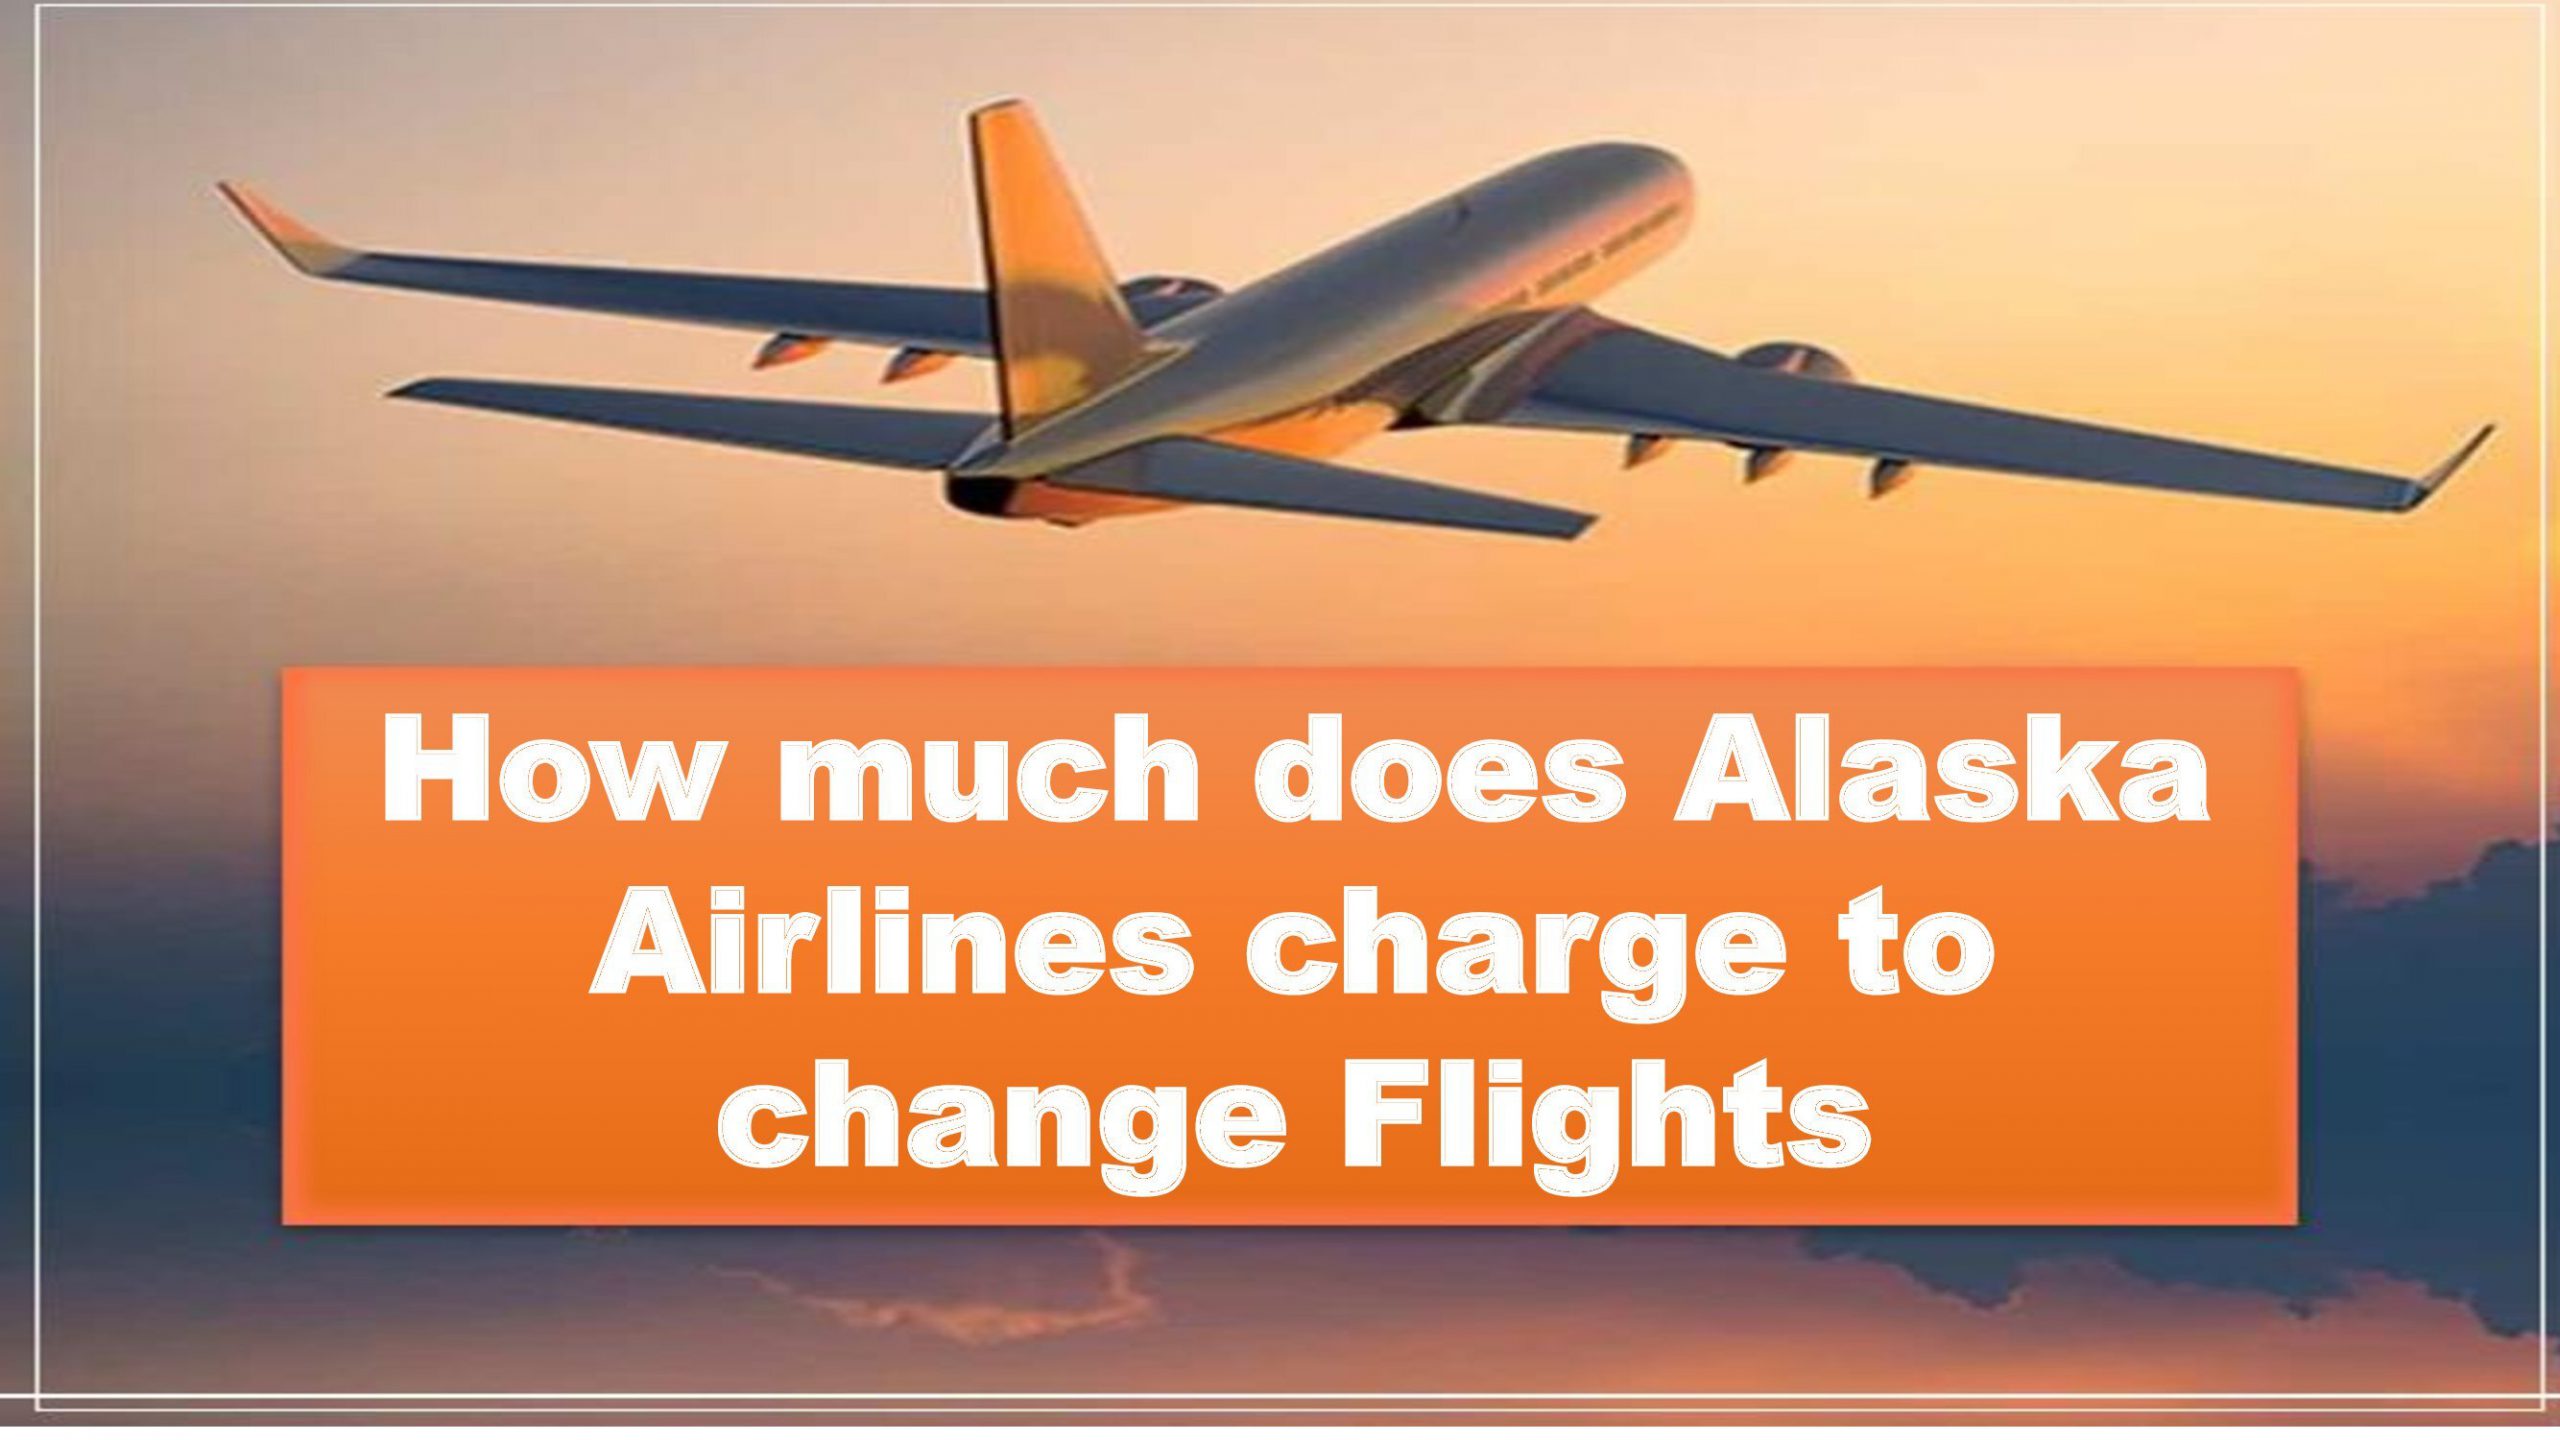 How much does Alaska Airlines charge to change flights?